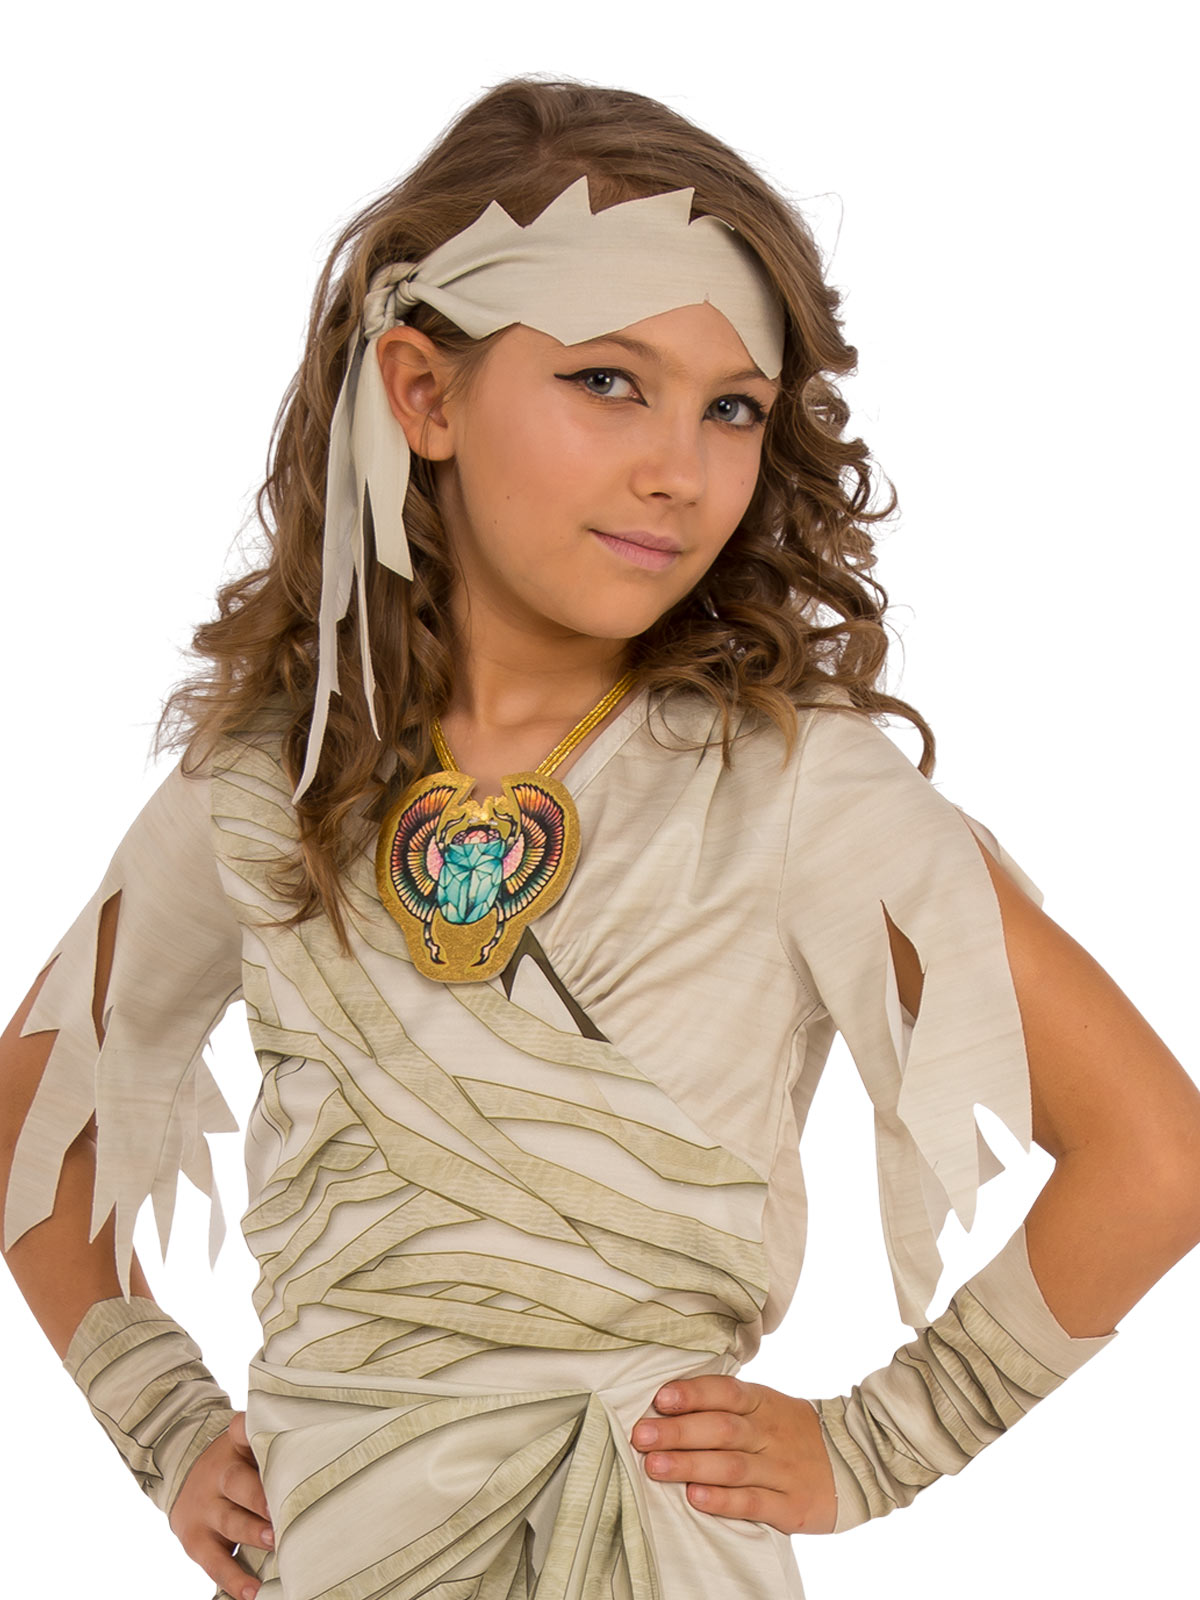 Excellent quality and Fashionable - Costume Direct Gypsy Girls Costume